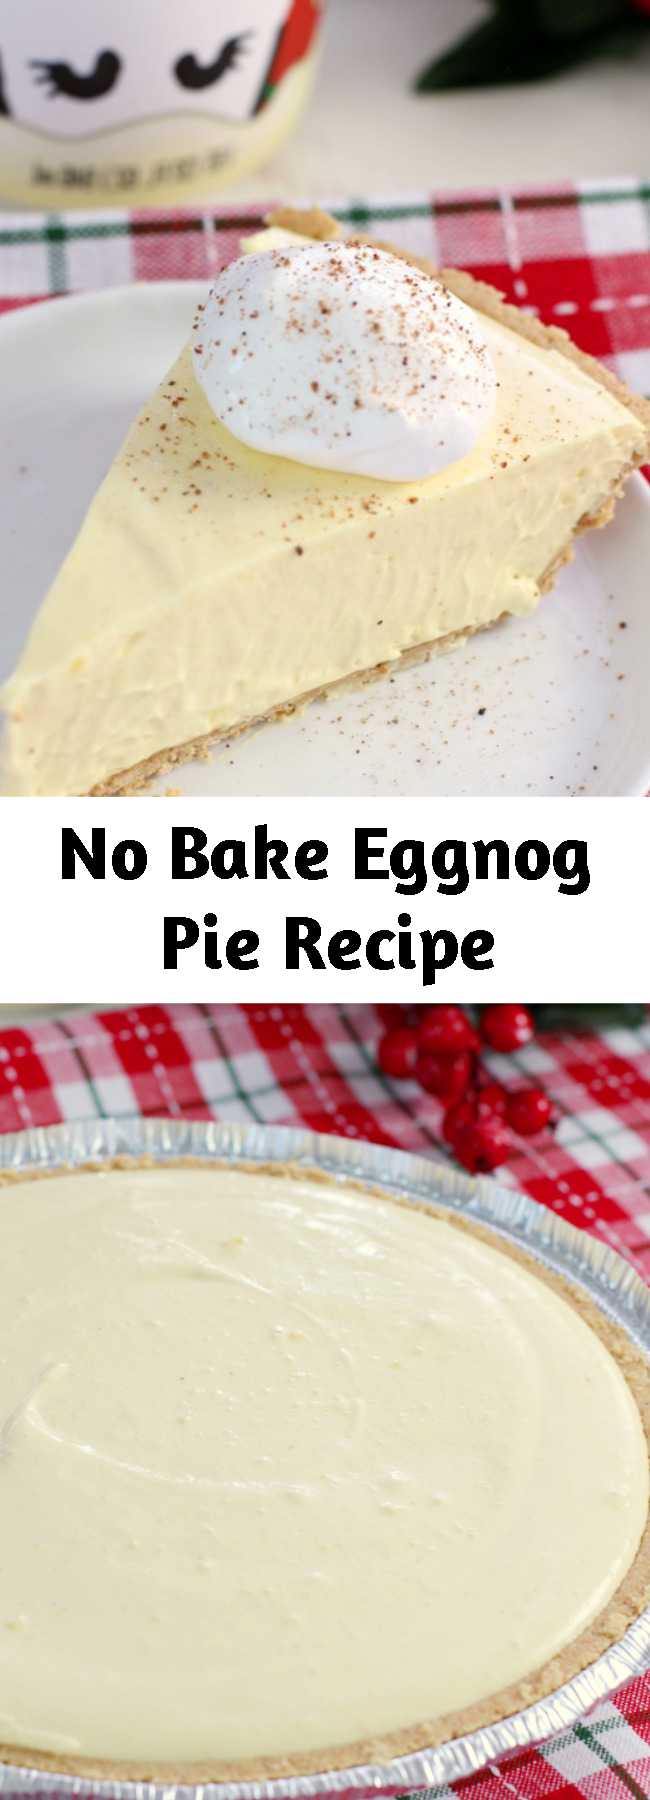 No Bake Eggnog Pie Recipe - Your holiday won’t be complete without this No-Bake Eggnog Pie! It’ll become a family-favorite!